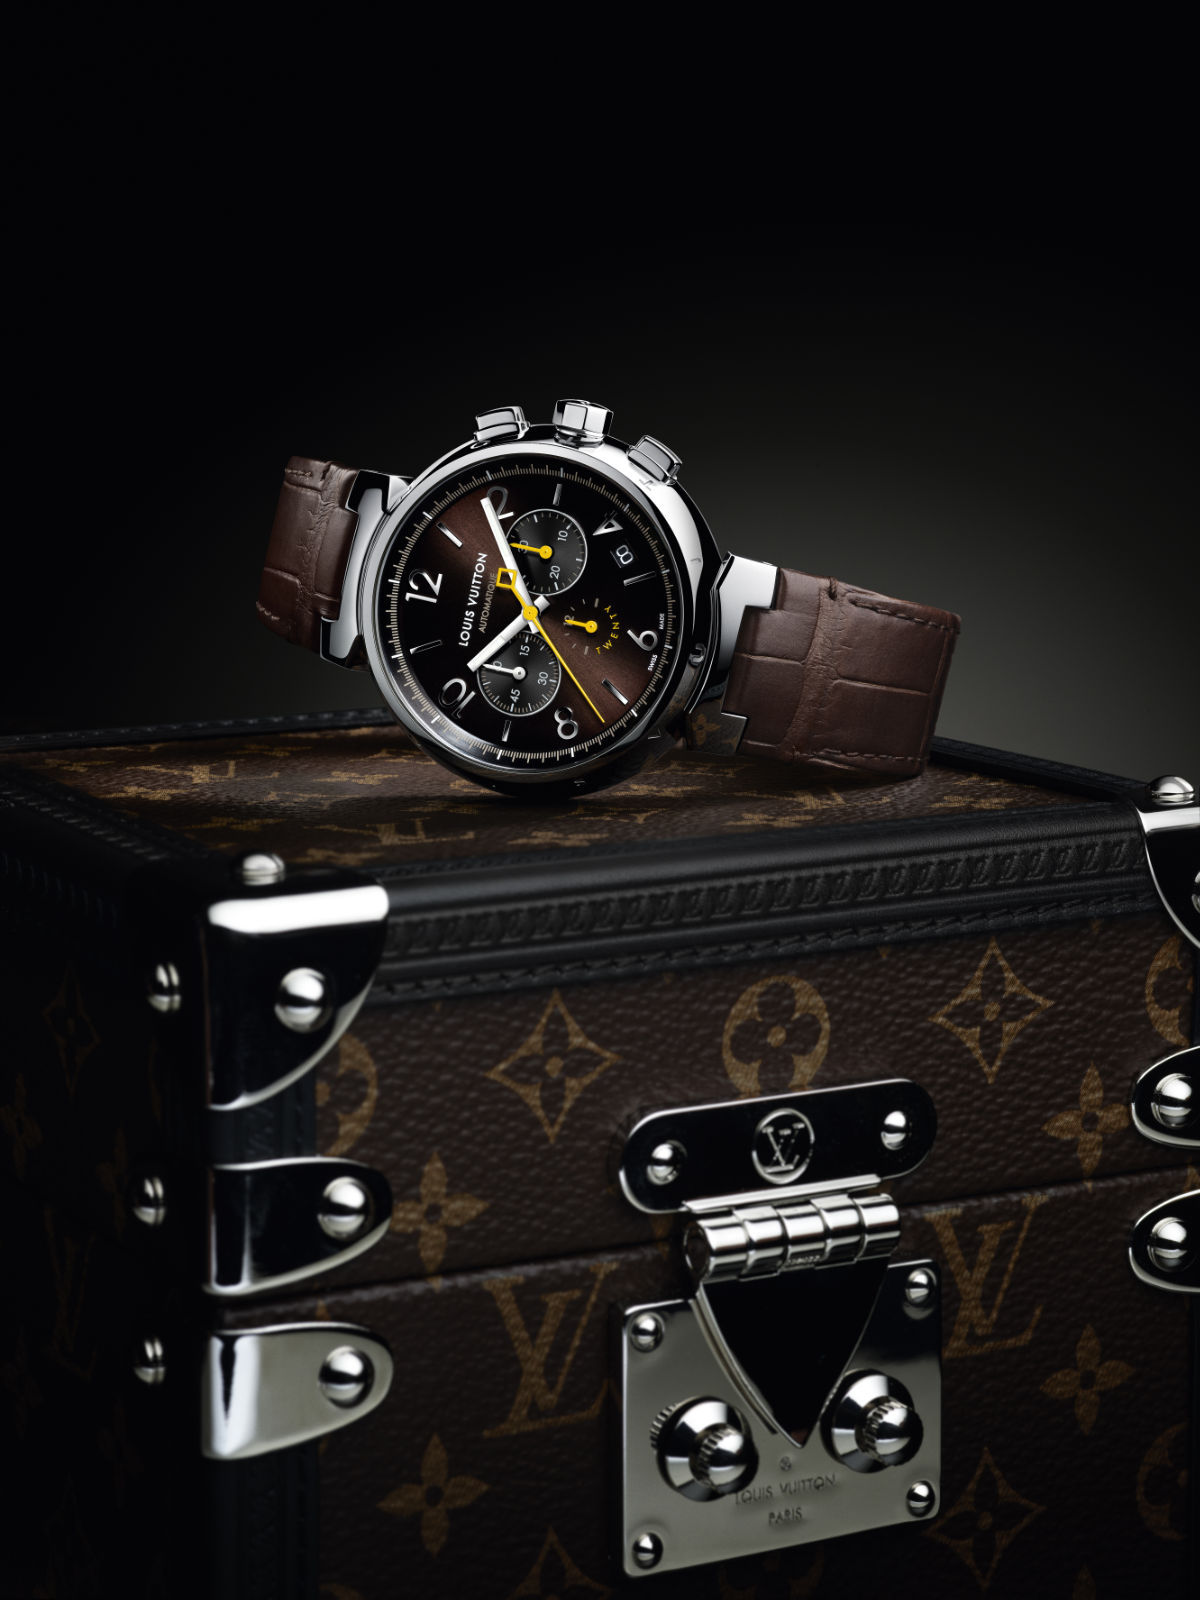 Louis Vuitton blazes a confidently masculine trail with the new Tambour  eVolution watch